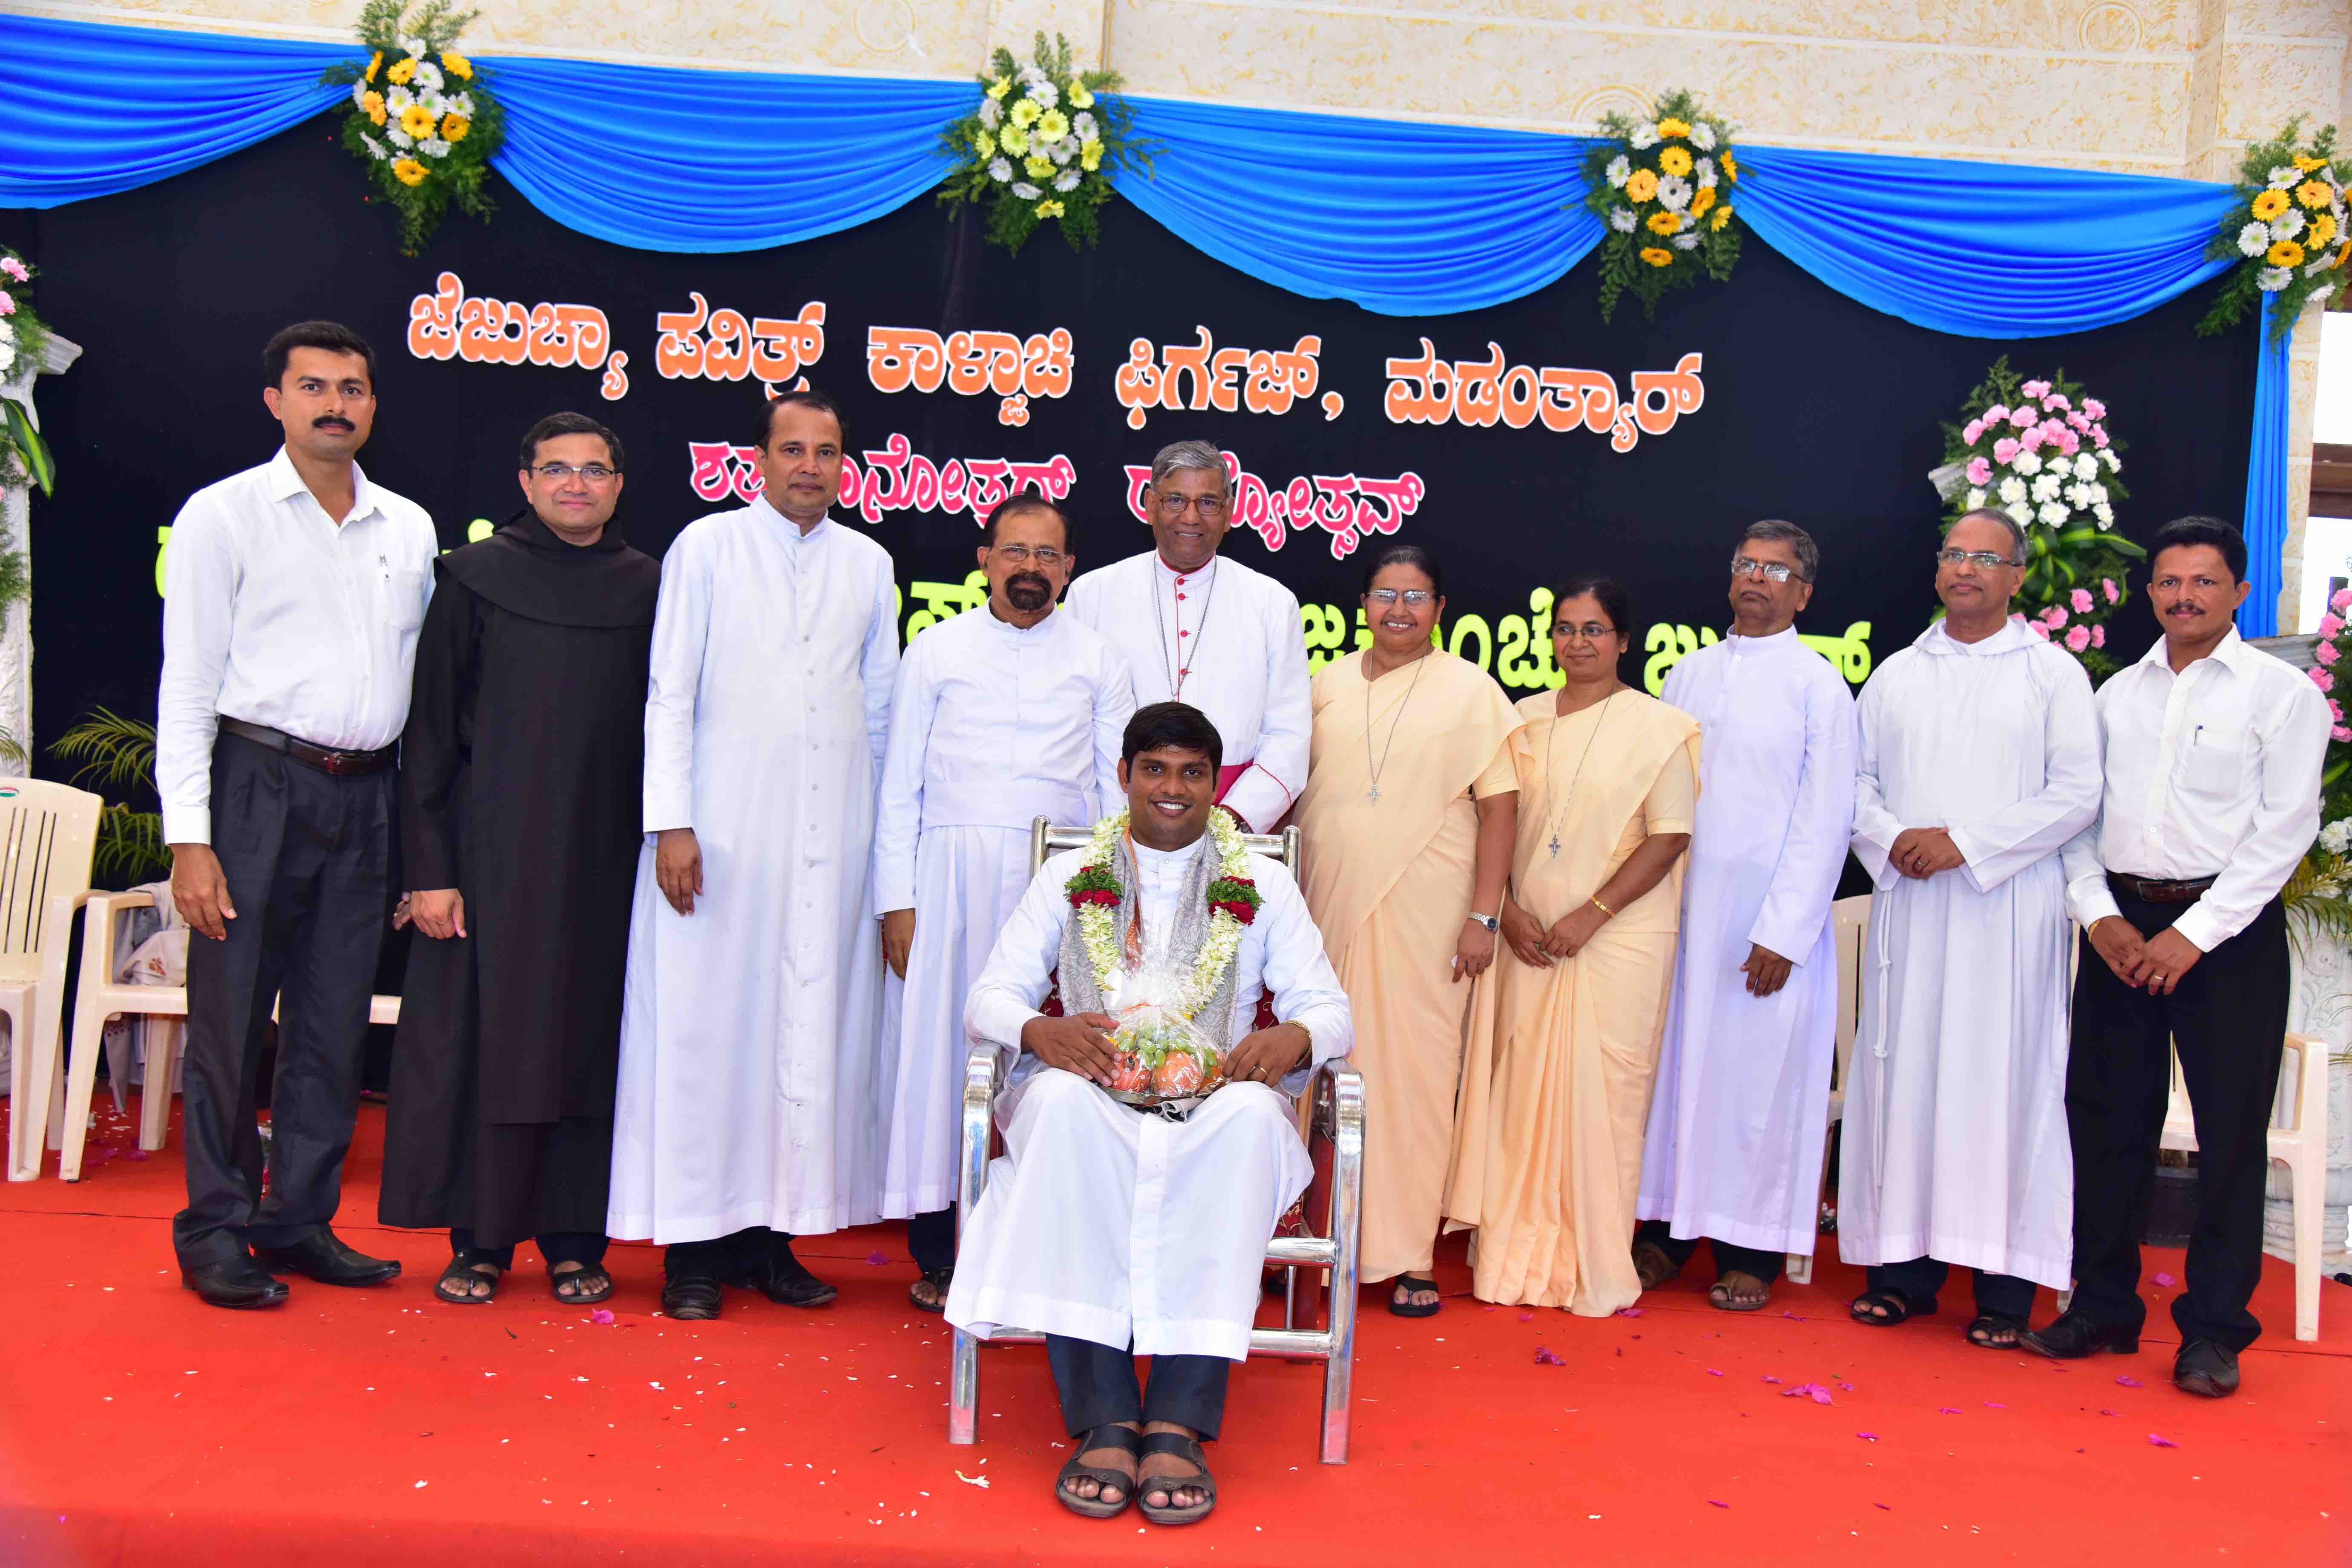 Vocation Day held at Sacred Heart Church, Madyanthar